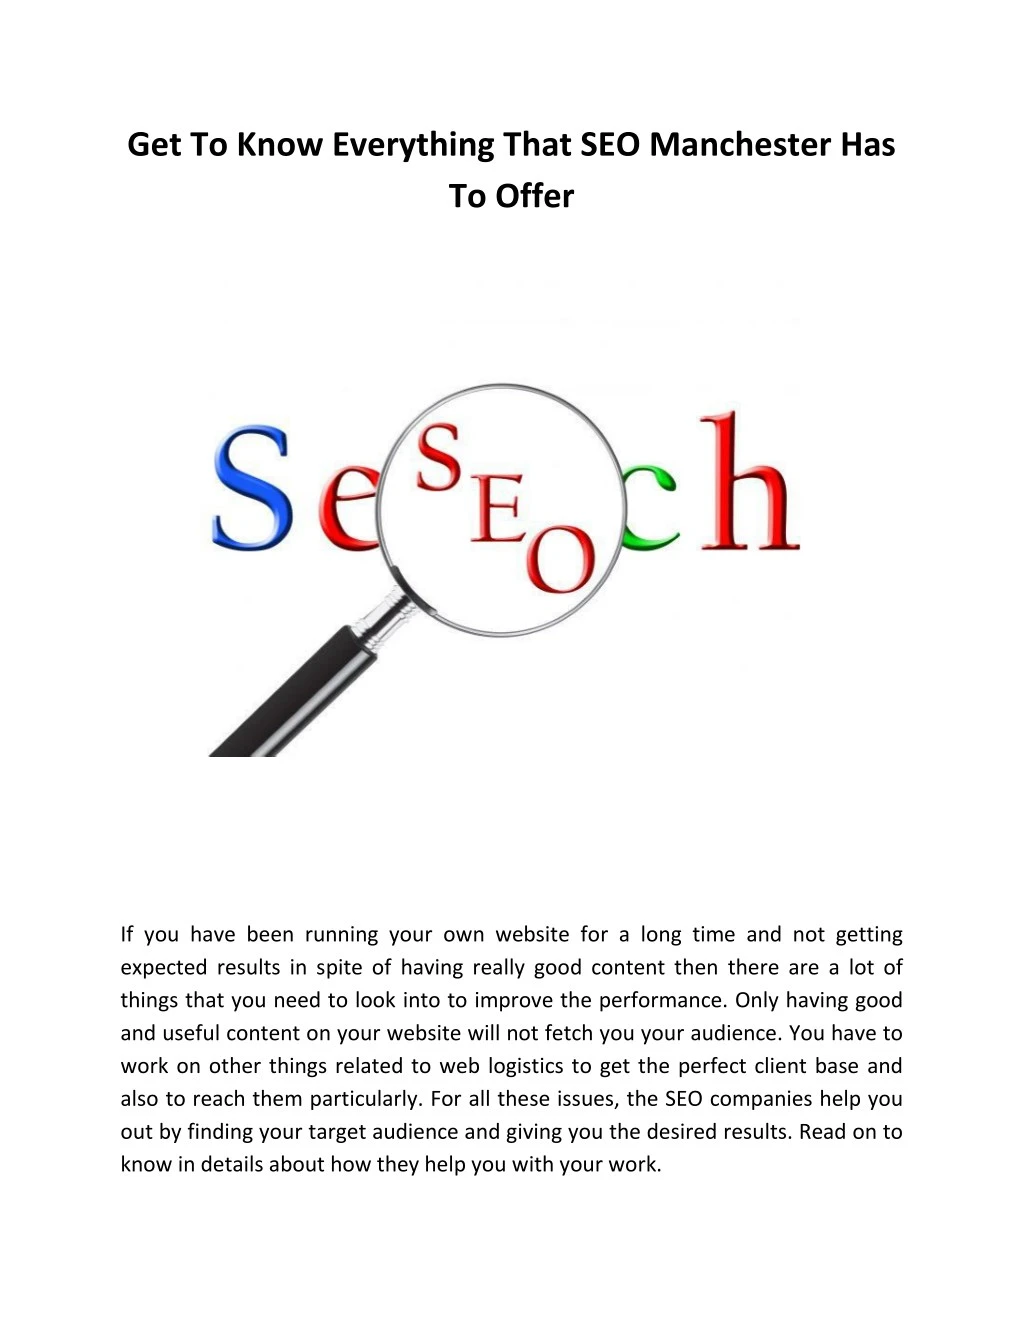 get to know everything that seo manchester